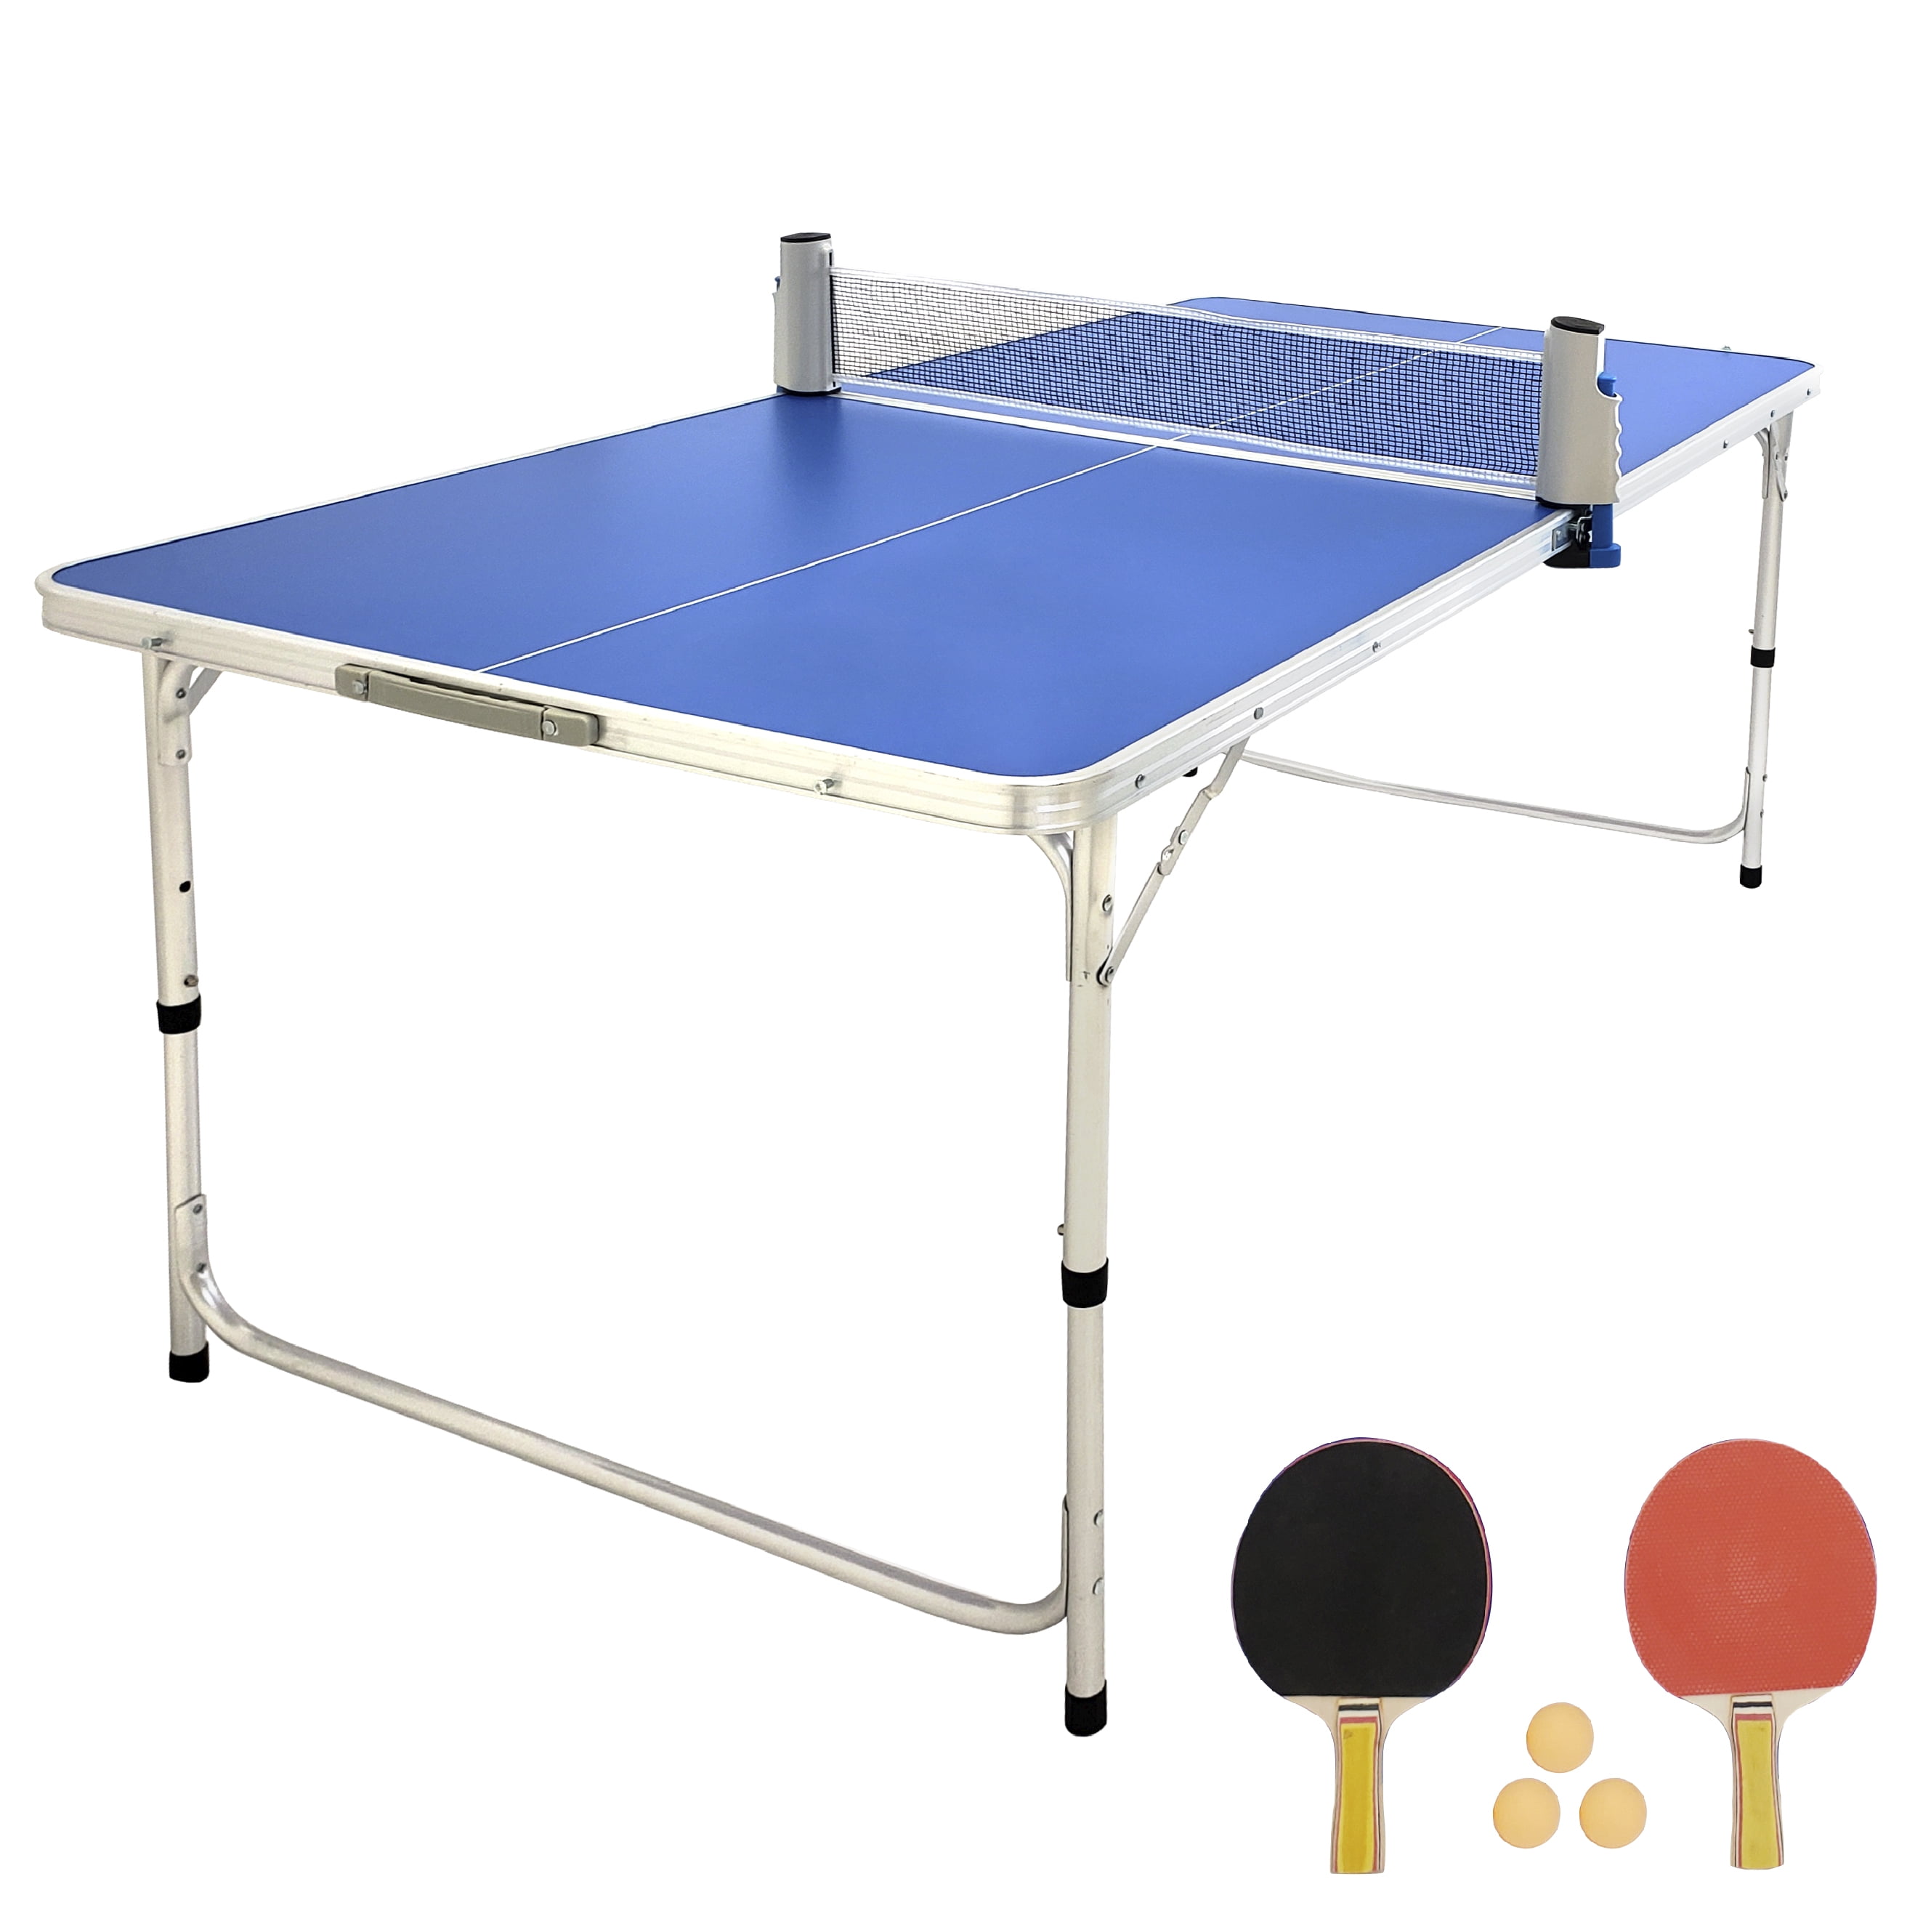 Table Tennis Ping Pong Table With Paddle Great for Small Spaces Indoor/Outdoor 